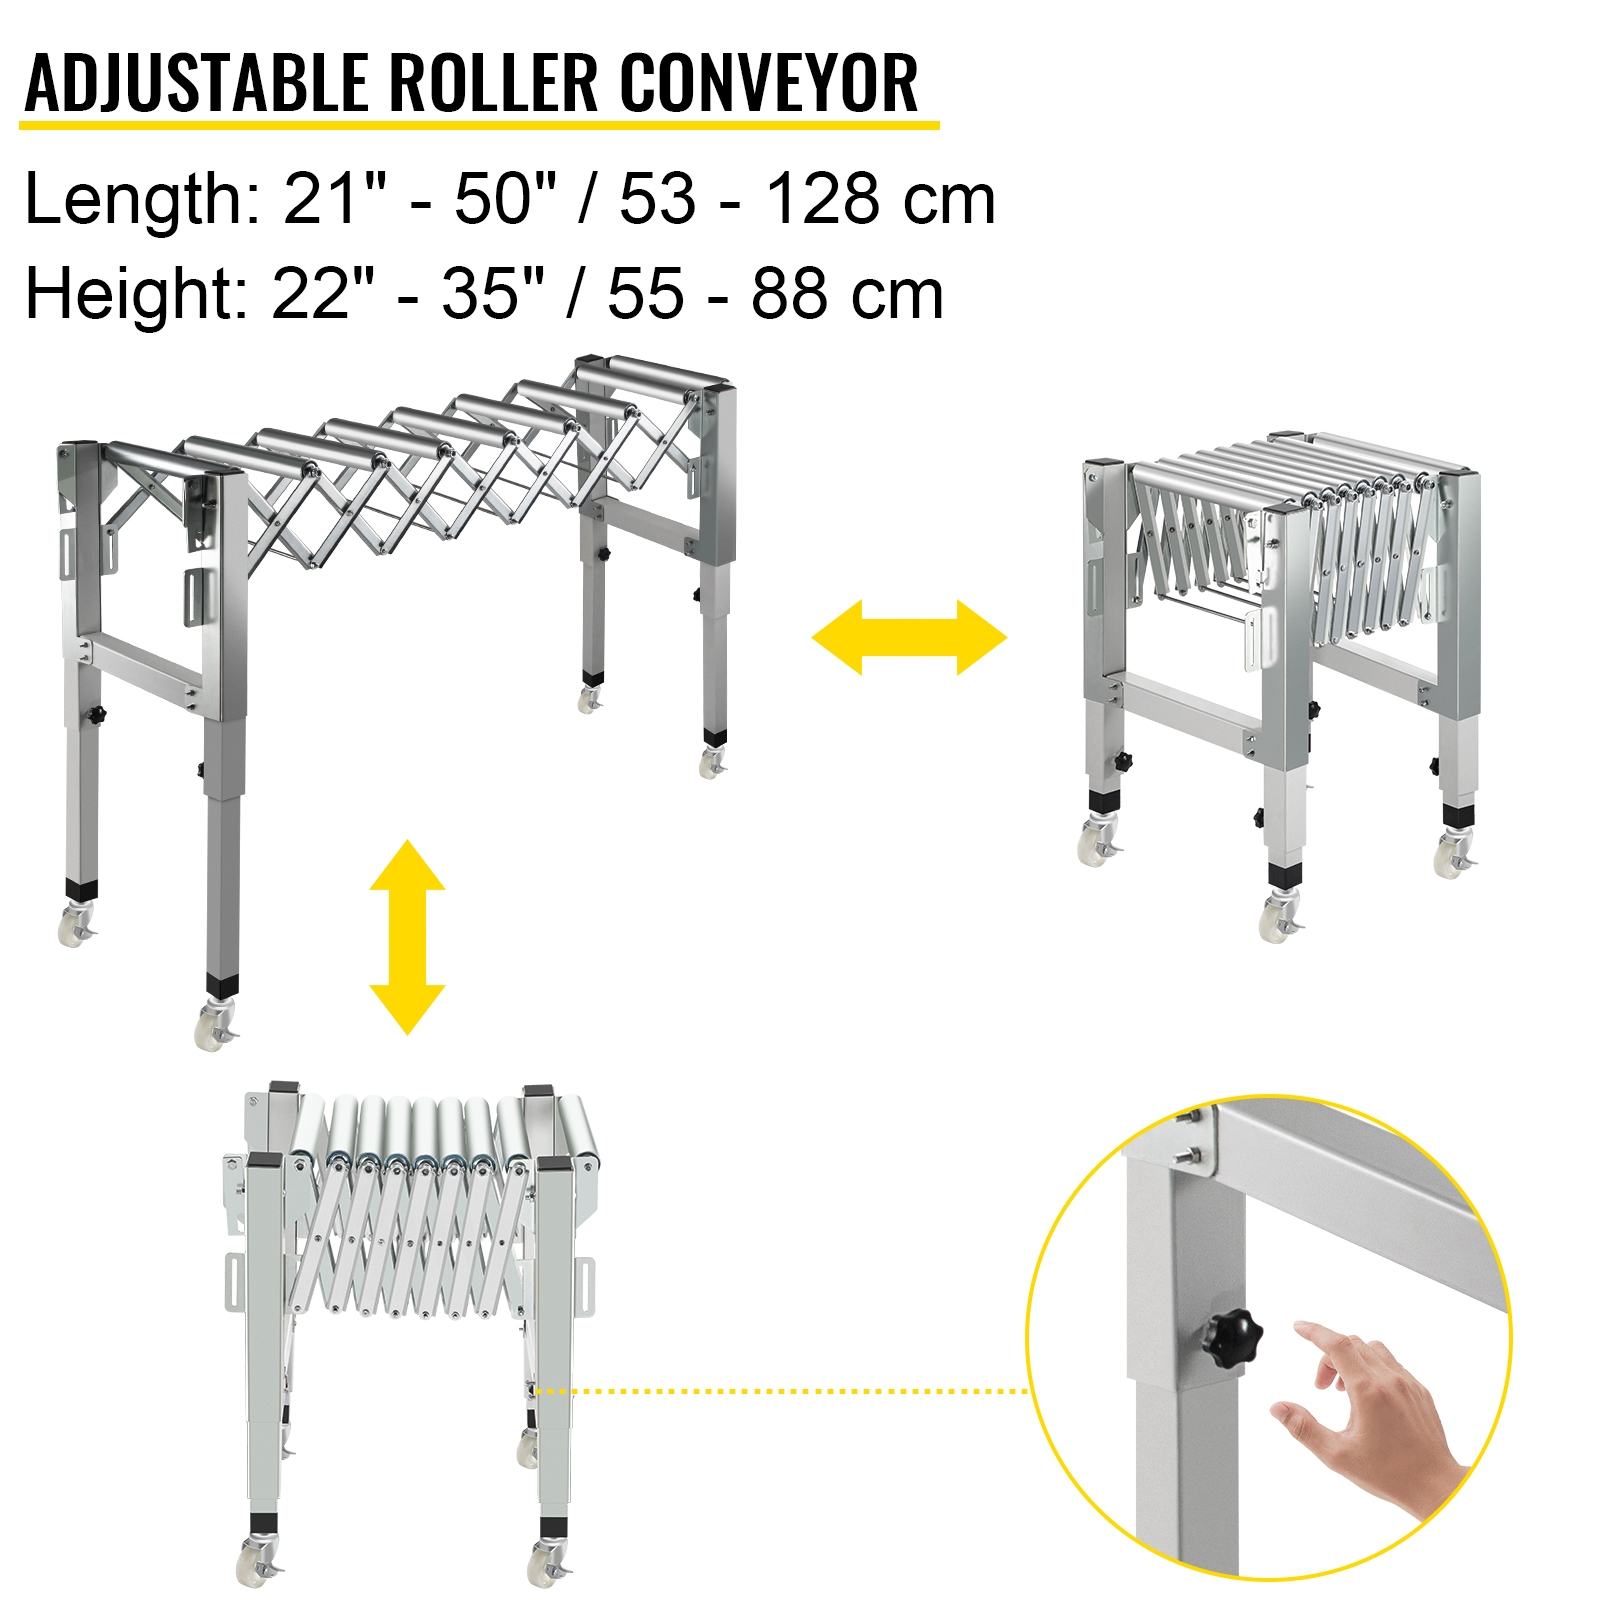 VEVOR Gravity Conveyor Roller 110 lbs Load Capacity Roller Conveyor 24-38 Height Roller Stand 1-3/4 ft Length 1-3/4 ft Width w/ 1.7 Galvanized Steel Rollers for Warehouses Assembly Areas Factories 